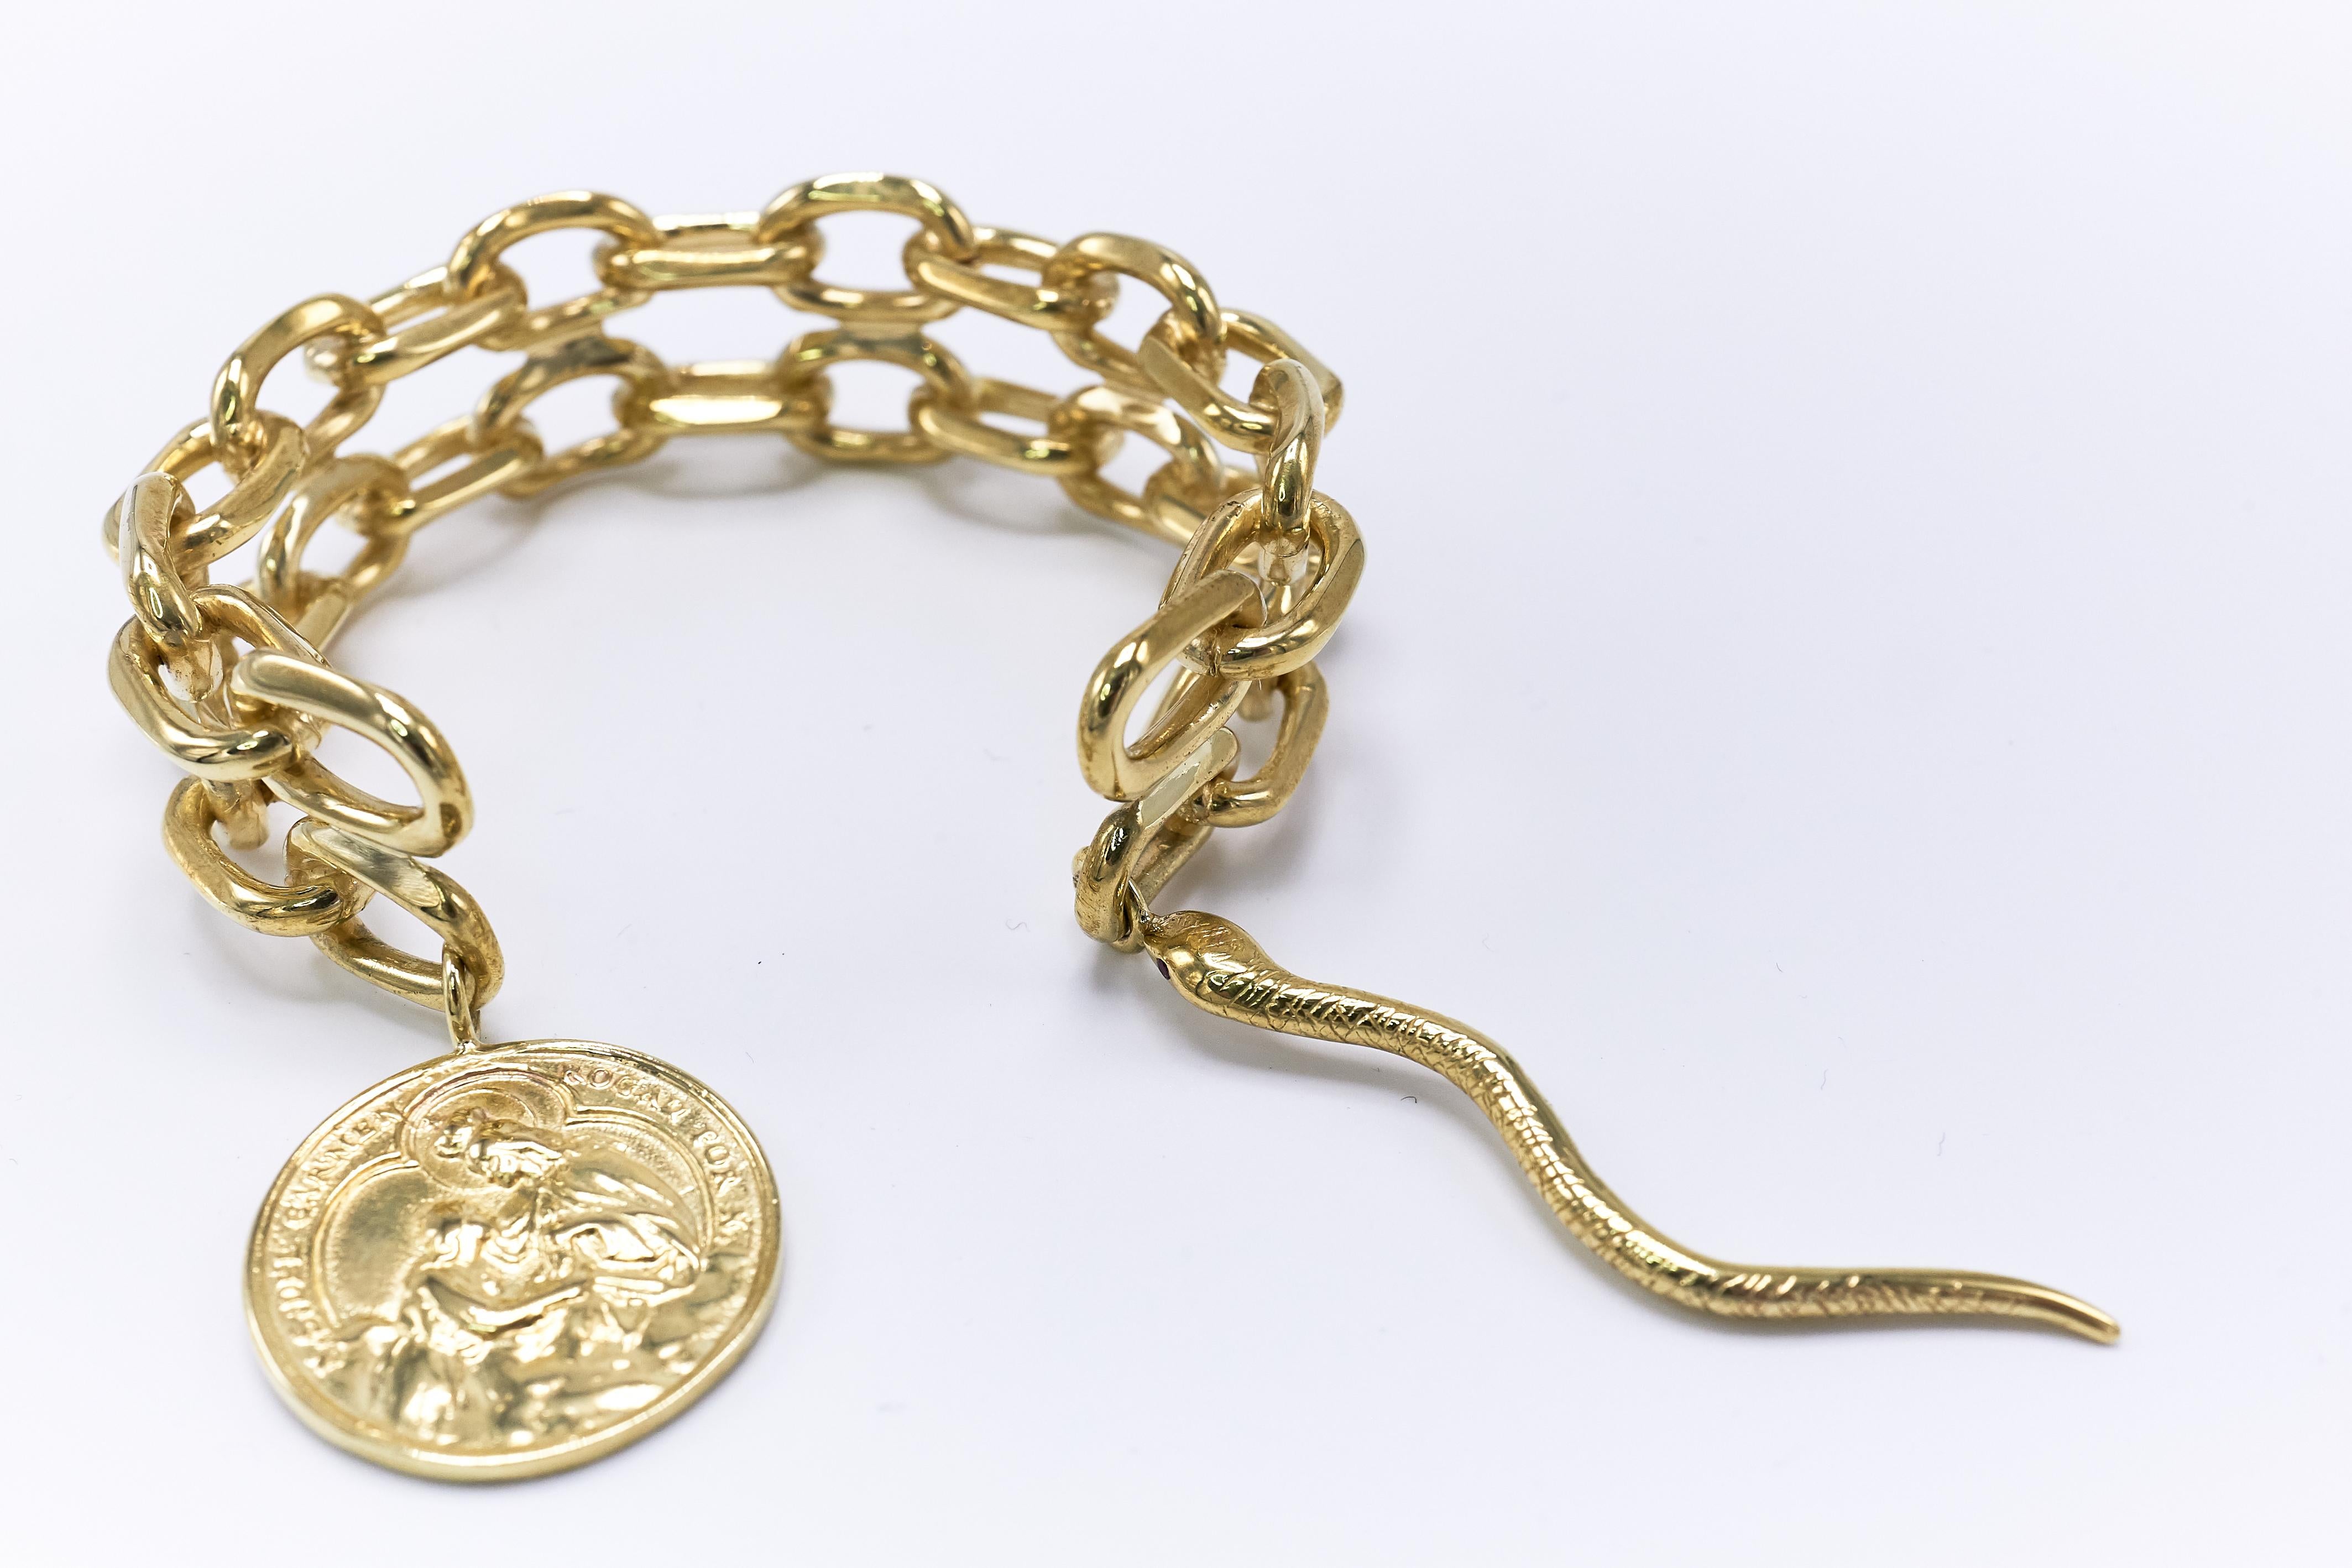 Statement Chunky Chain Cuff Bangle Bracelet Medal Gold Vermeil J Dauphin In New Condition For Sale In Los Angeles, CA